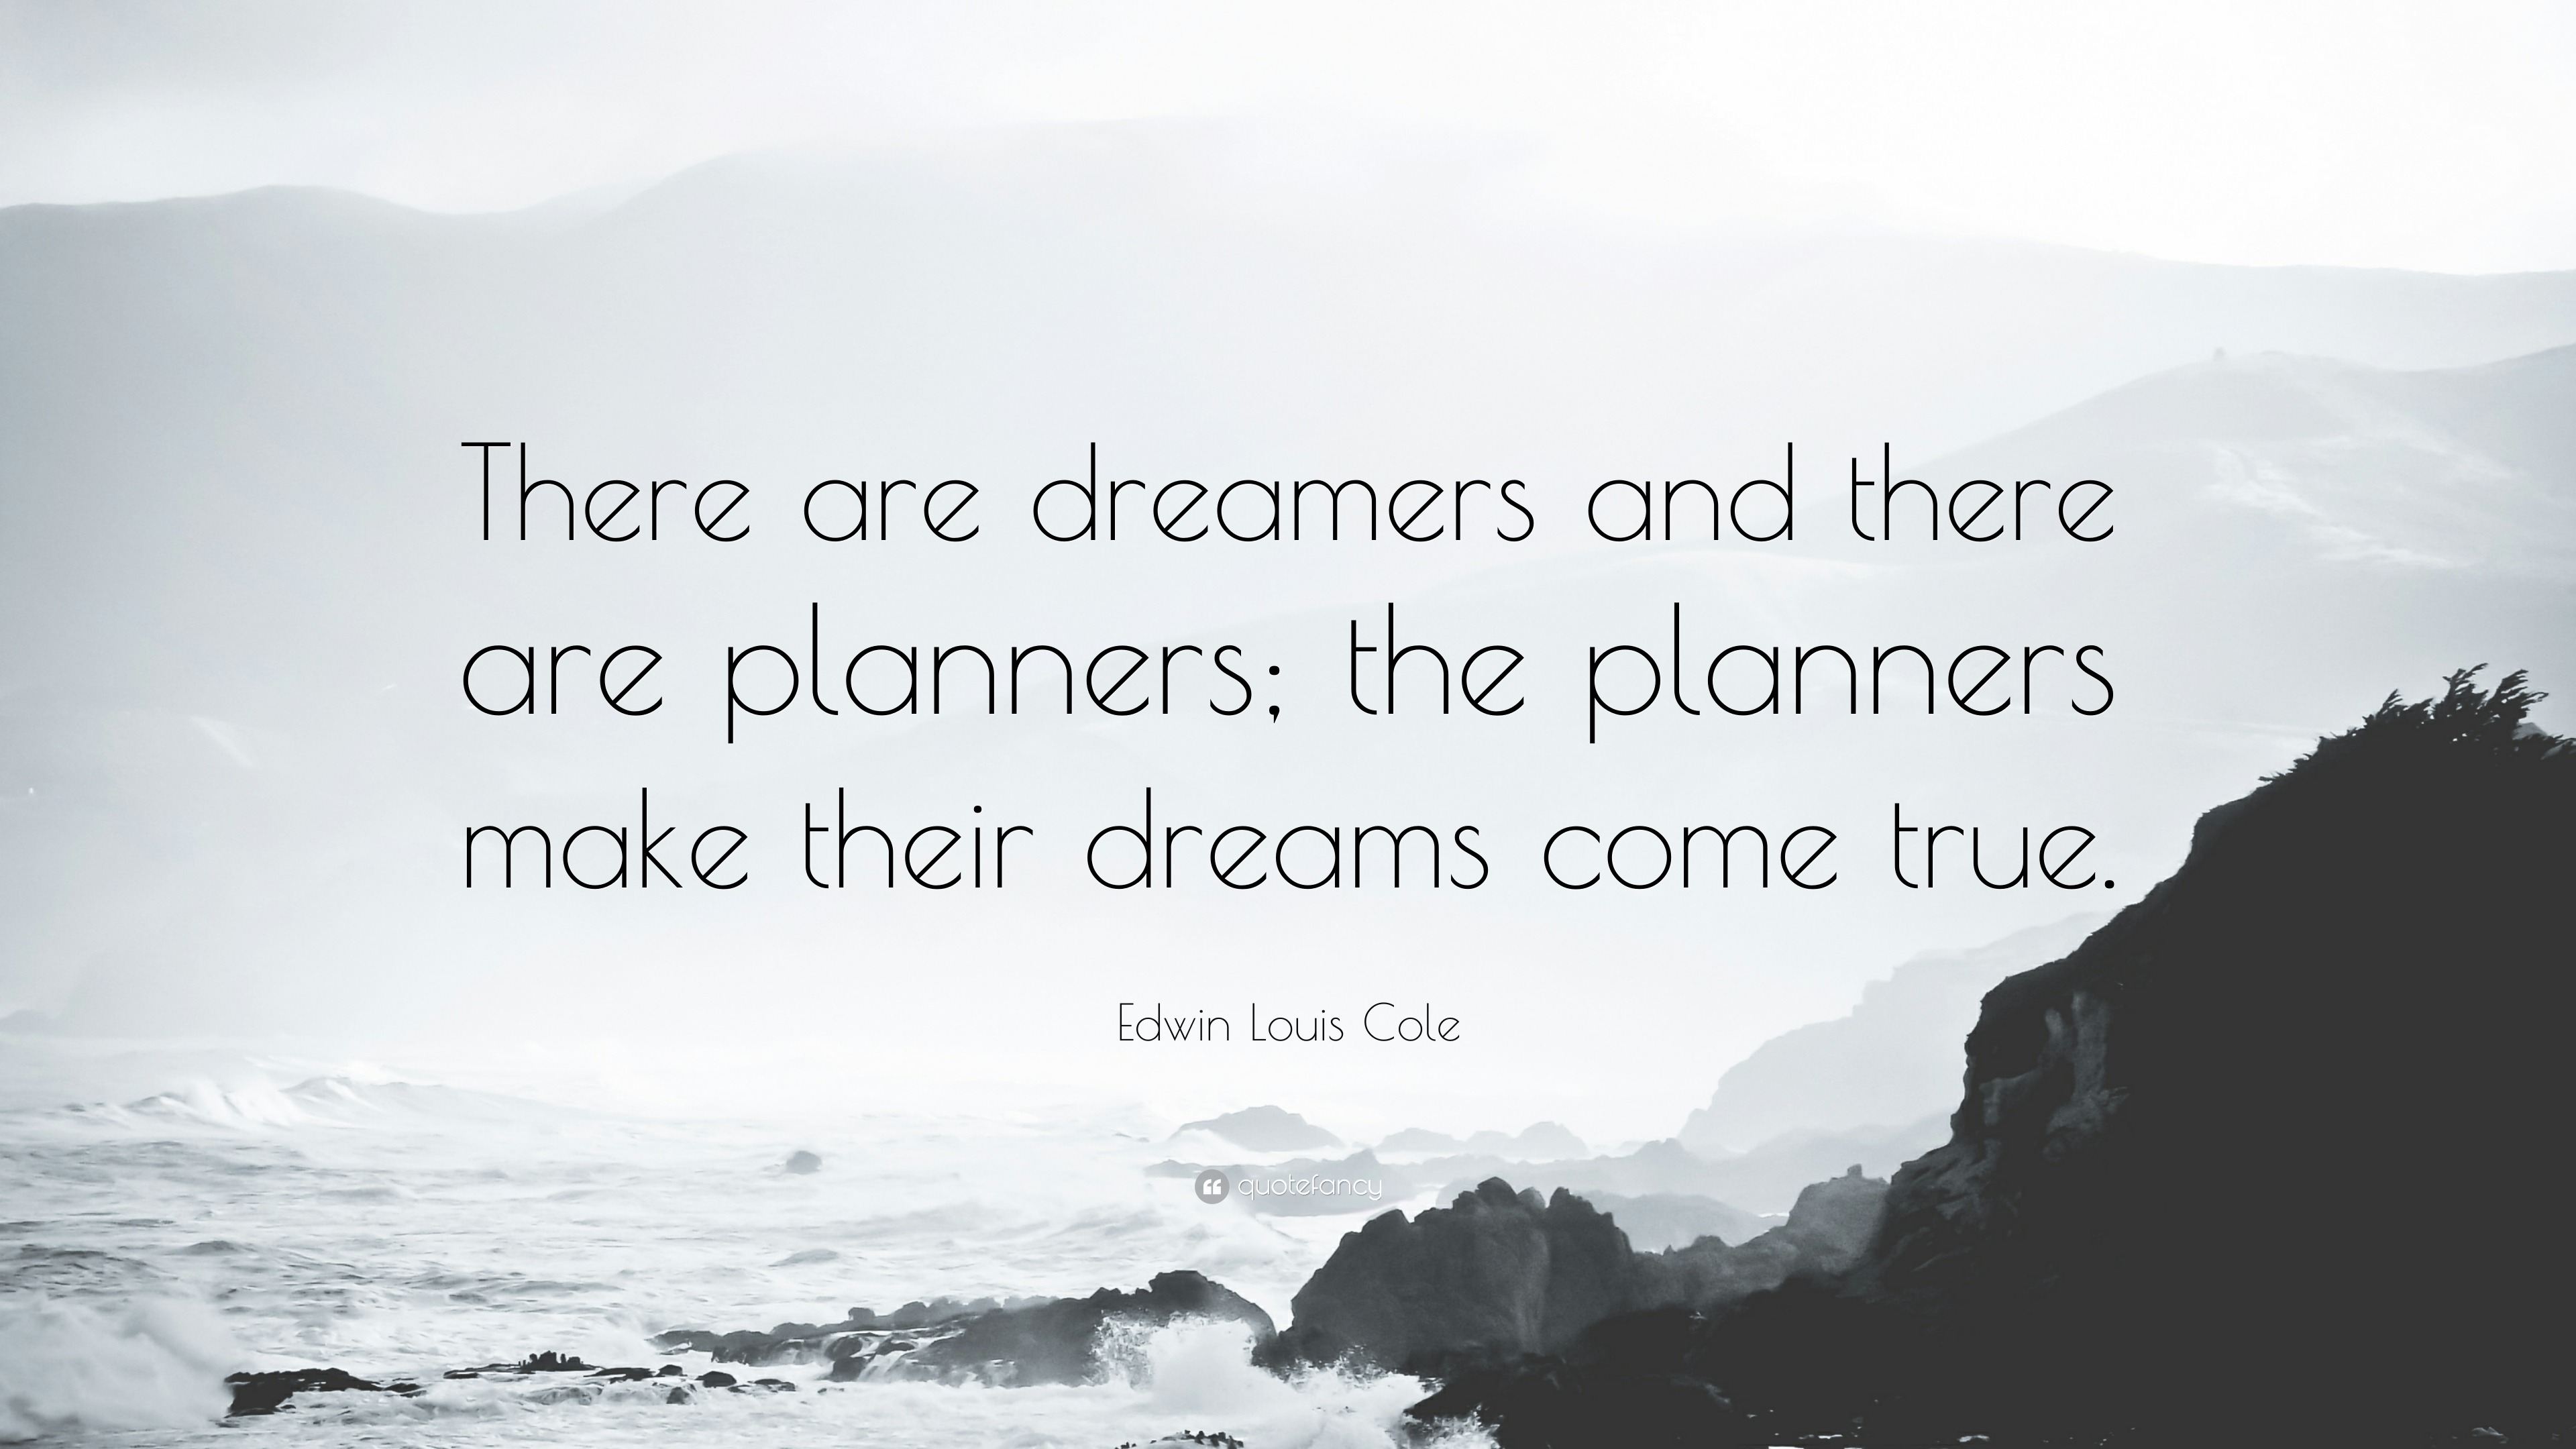 There are dreamers and there are planners; the planners make their